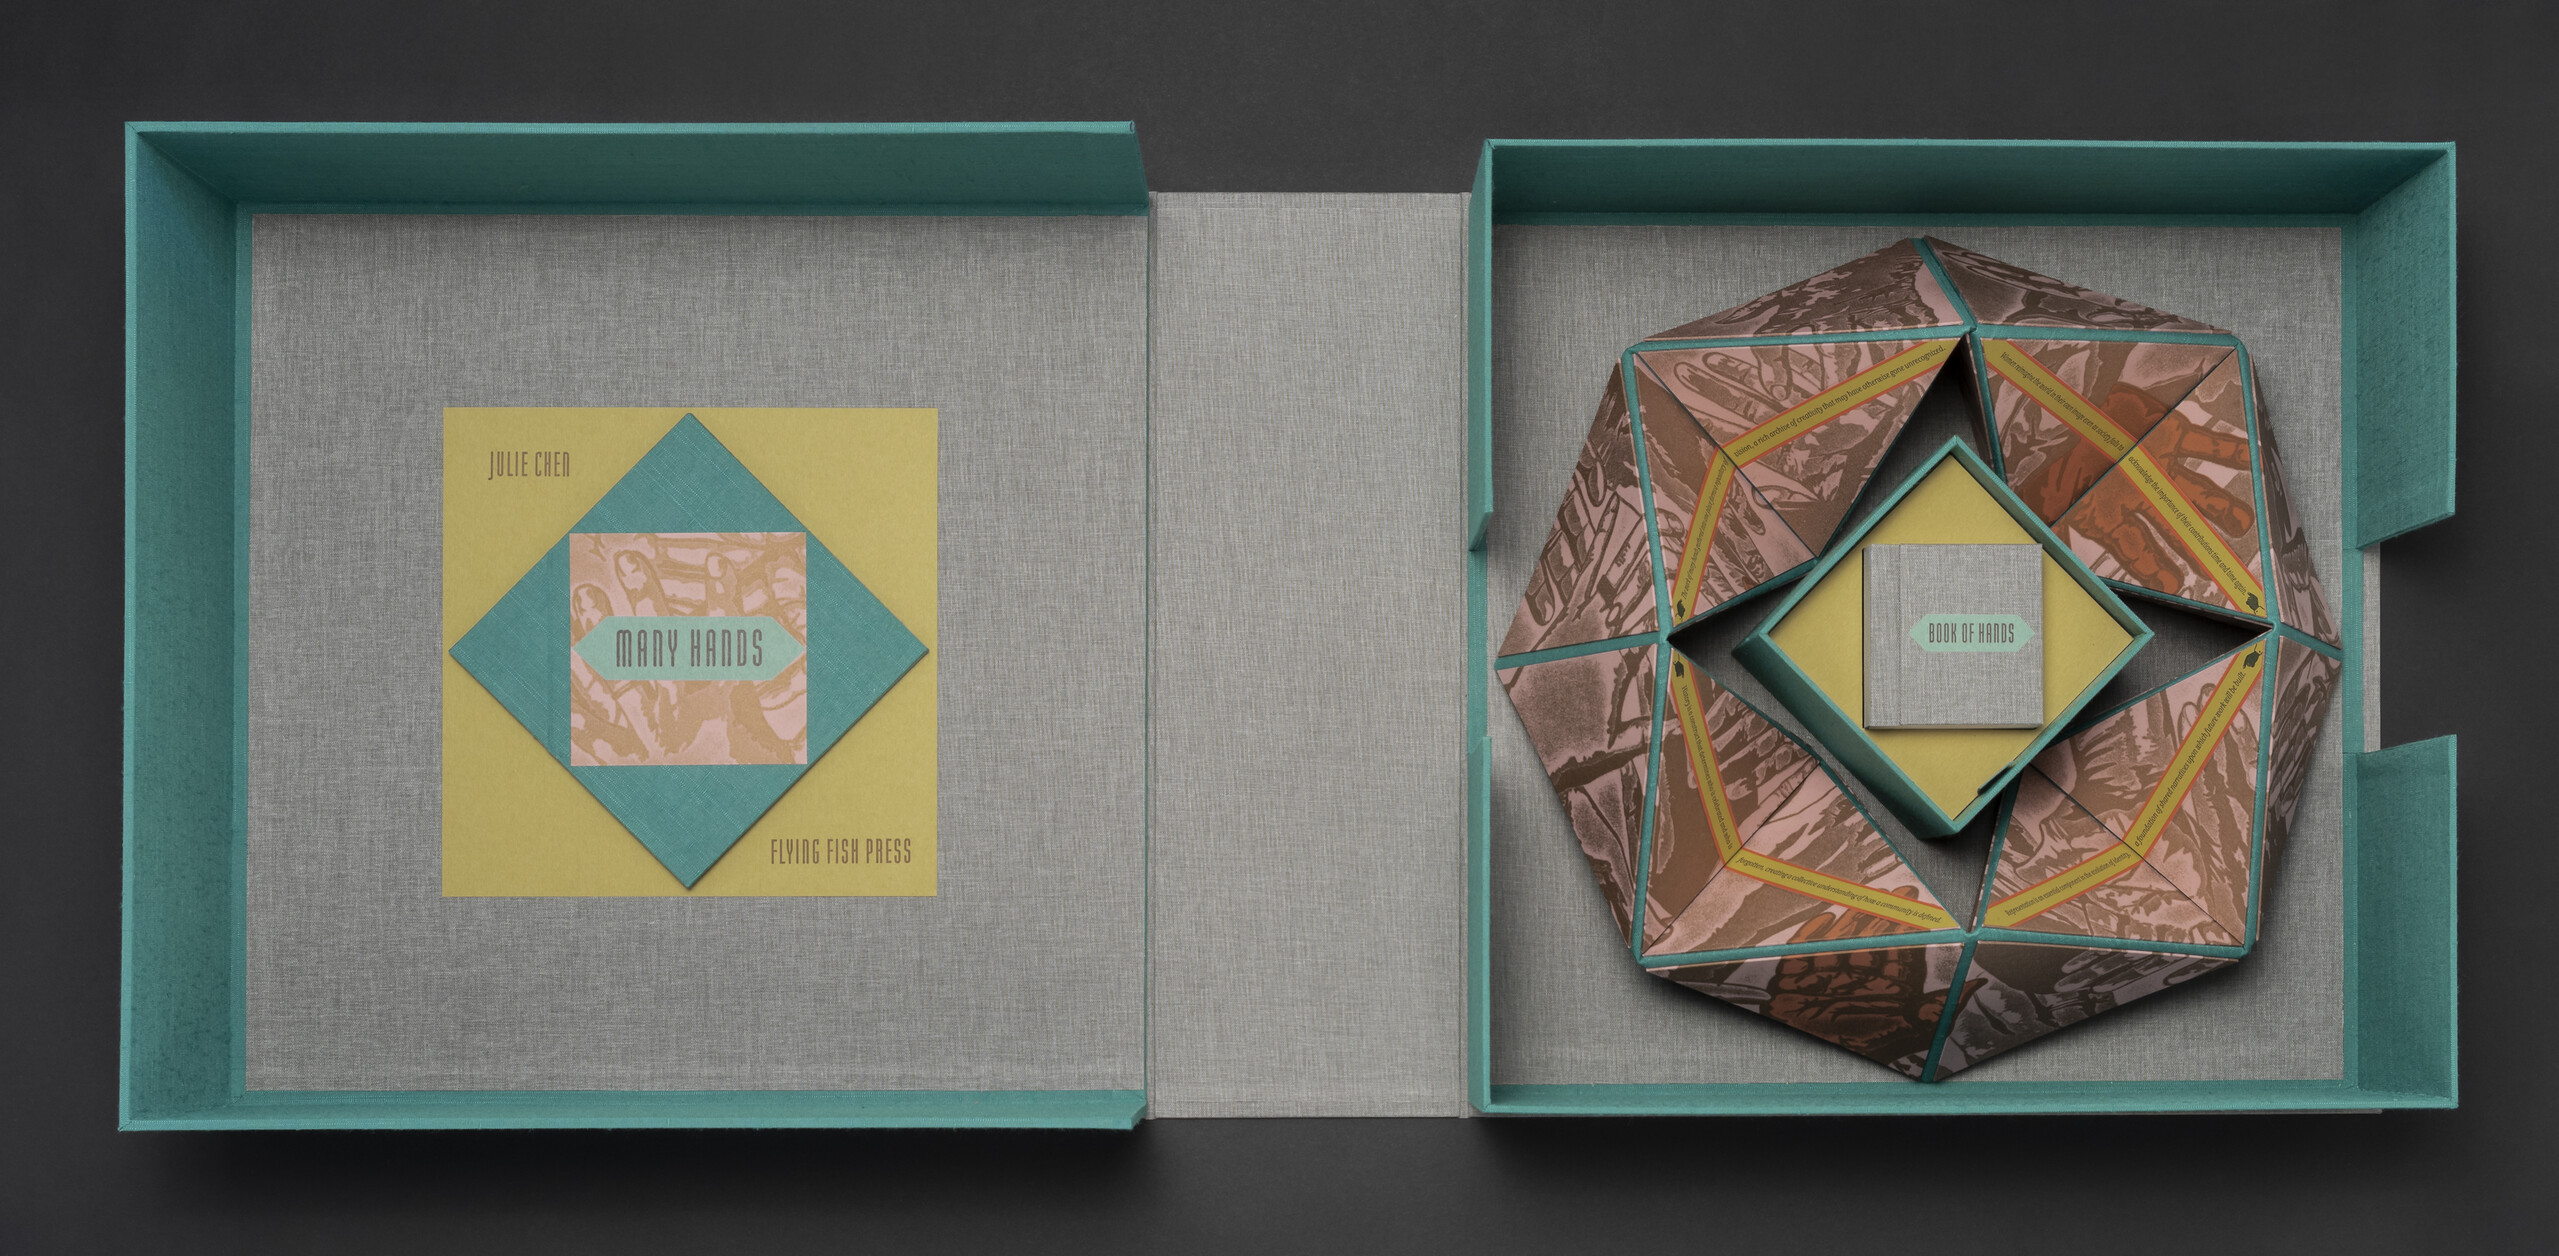 A artist's book made of a teal and grey box, inside of which nests a yellow, teal, brown, and pink geometric form holding a very small grey book with the words Book of Hands.